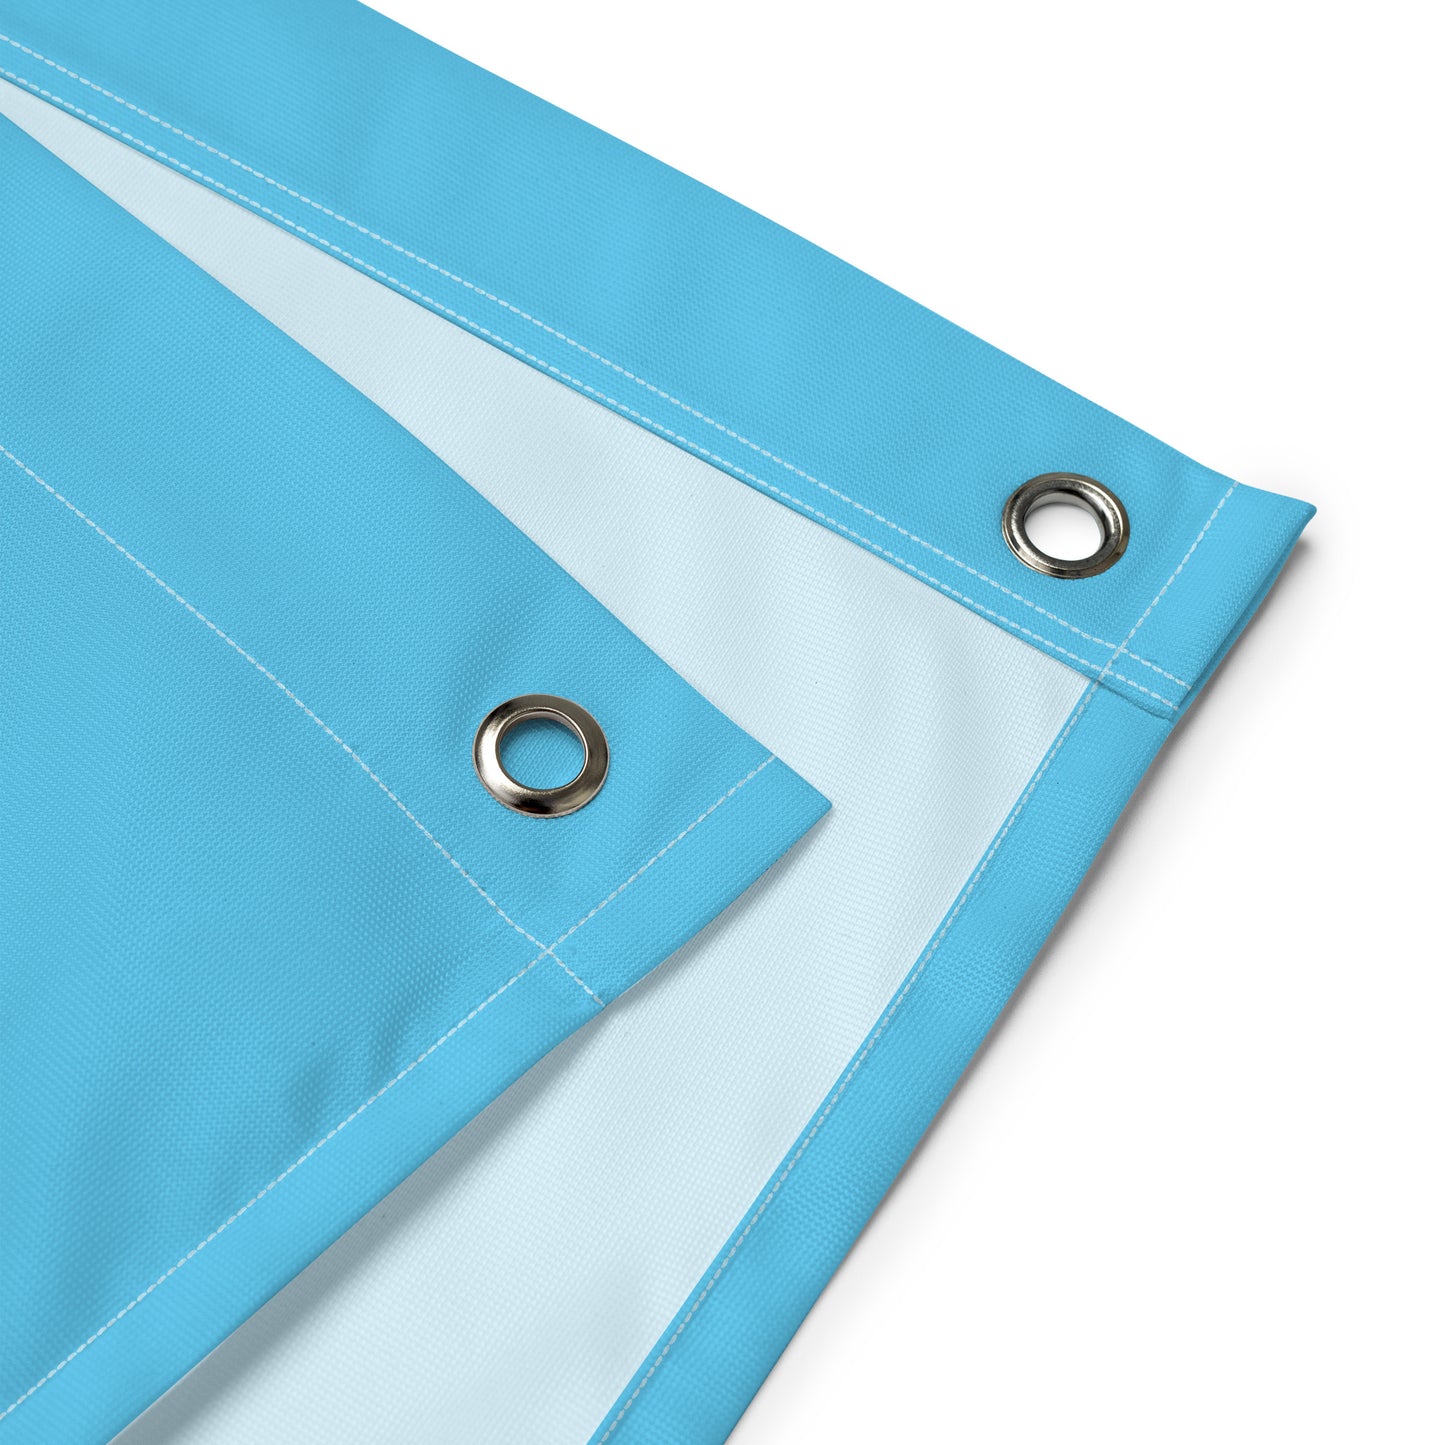 close-up of the grommets at the corners of the transgender blackbeard pirate flag